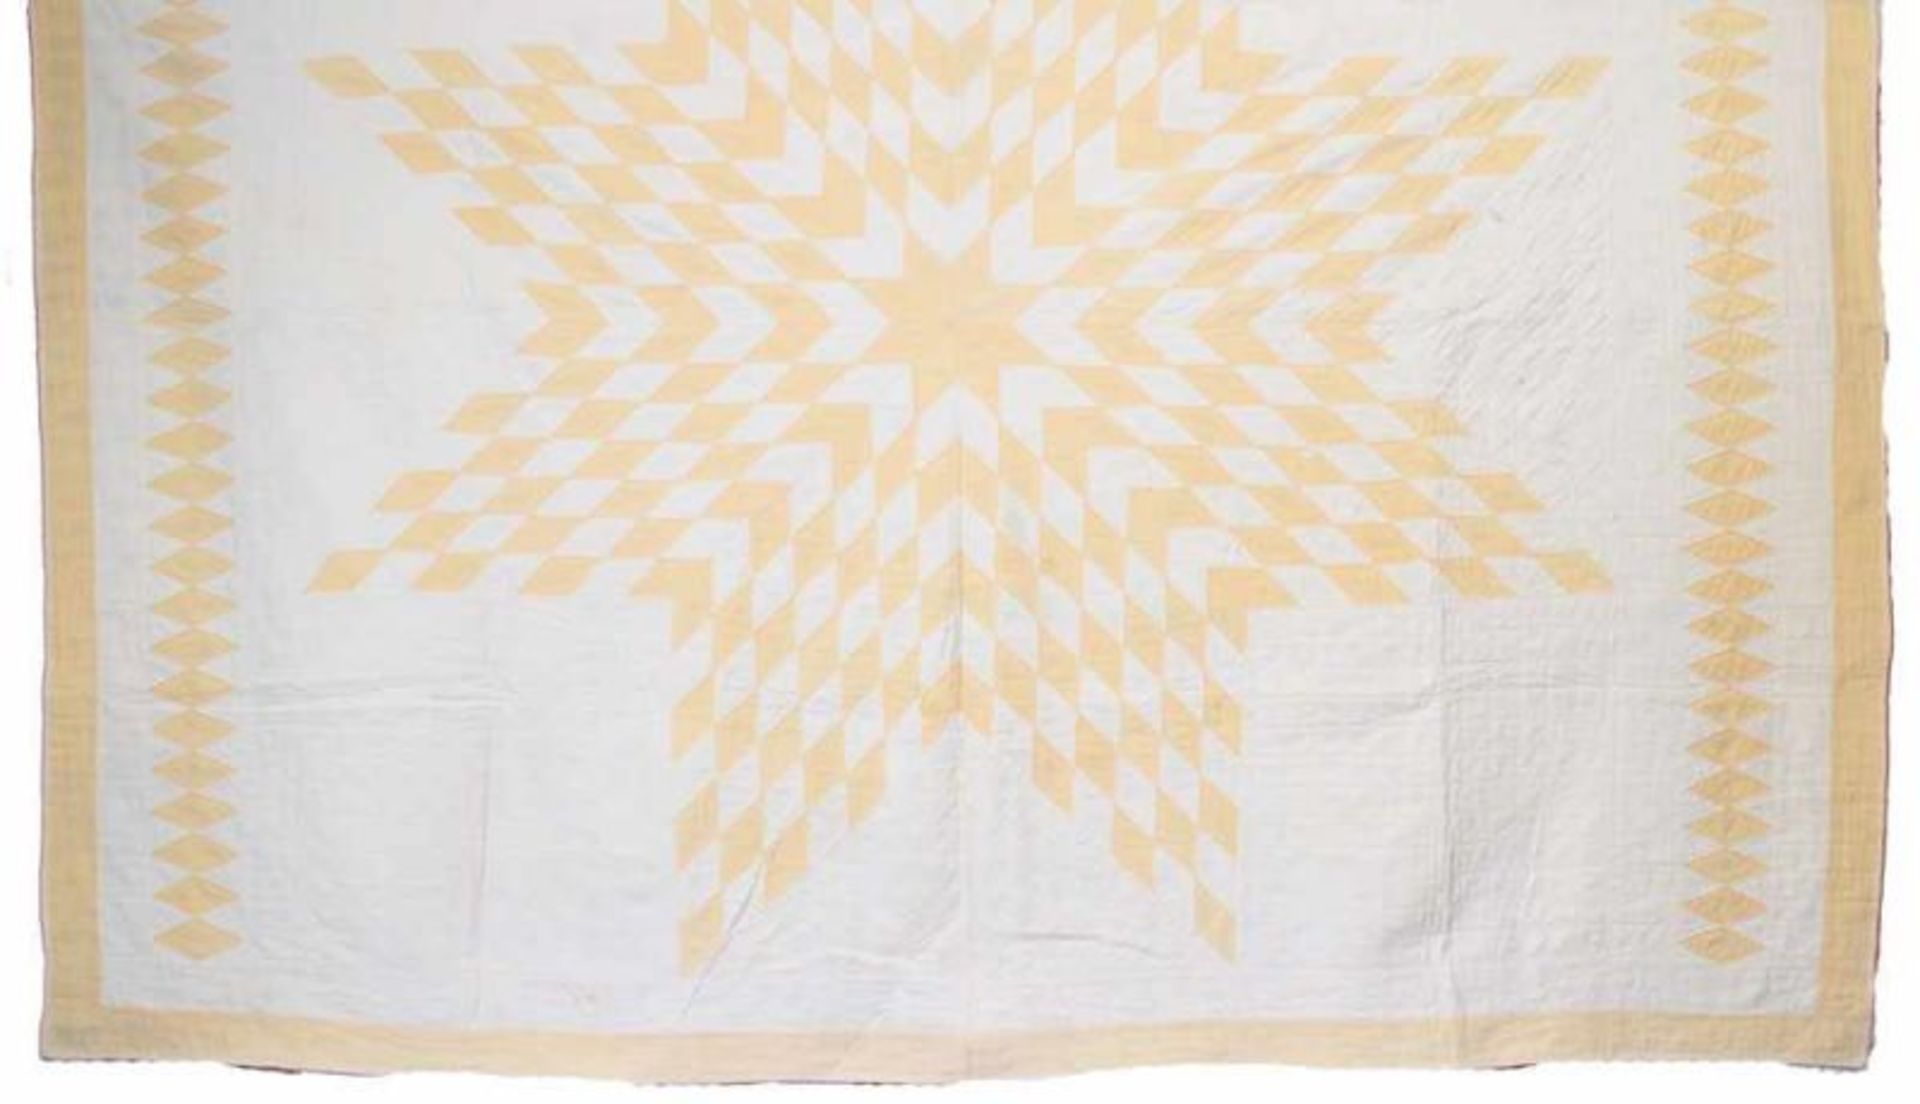 Quilt.North-East Ohio, um 1880. Baumwolle. L: 2,11 x 1,71 cm. Lit. America's Quilts and Coverlets L.